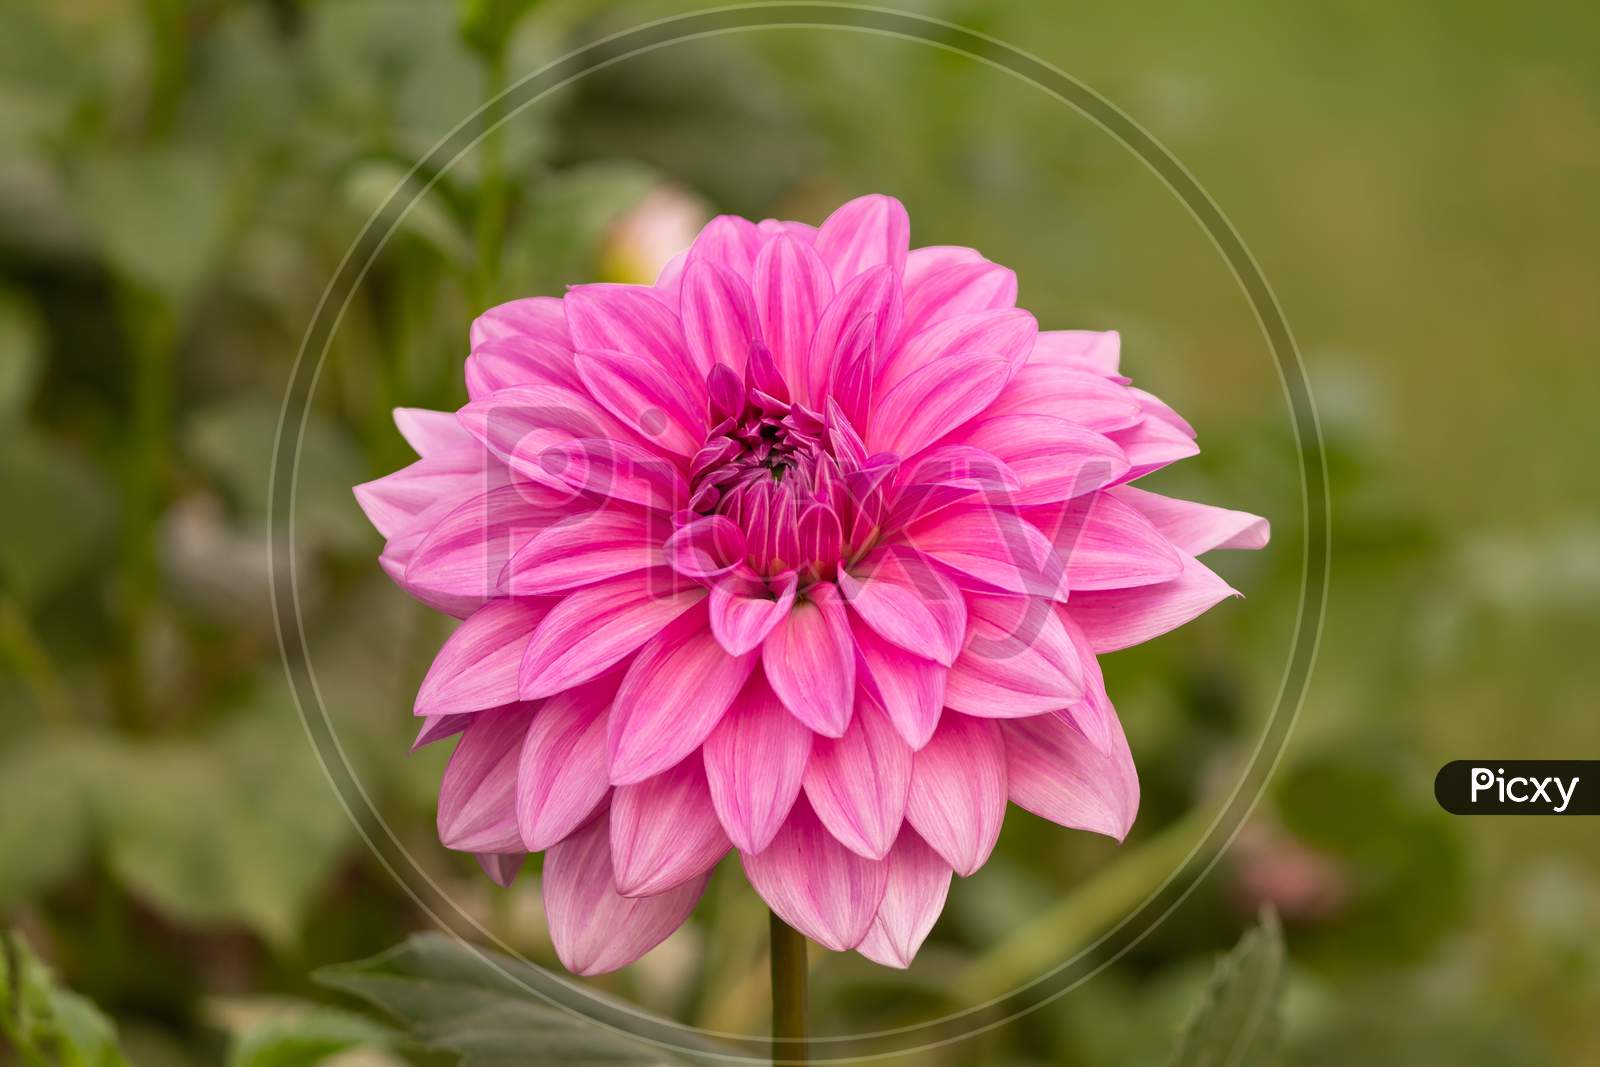 View Of Pink Daisy Flower In The Garden On A Stem In Cloudy Day Facing Front In Landscape Orientation